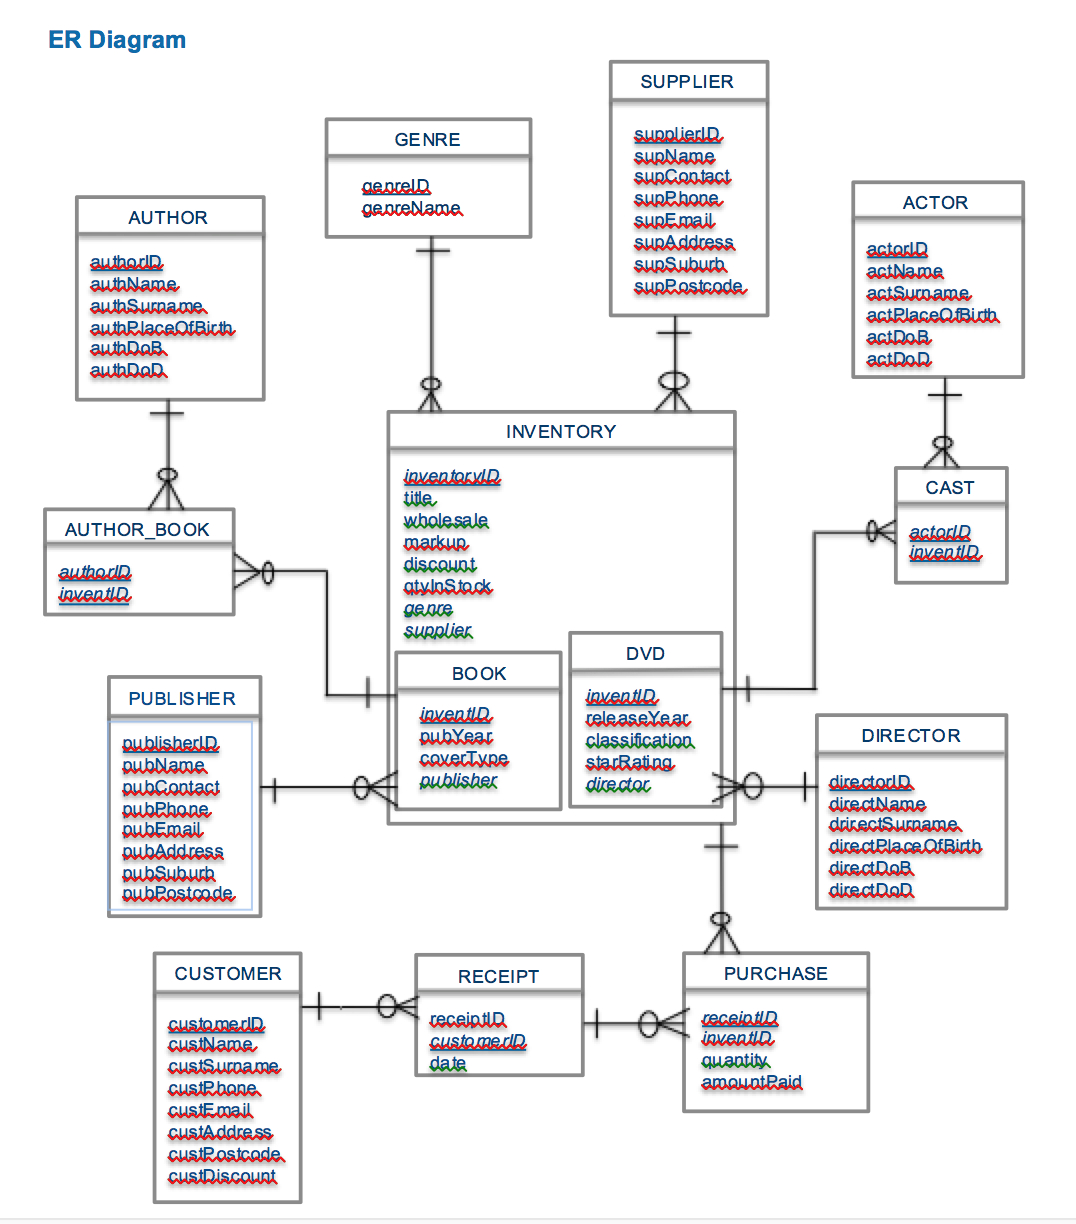 How Many Tables Will The Relational Schema Have For This Er Diagram pertaining to Er Diagram Examples List